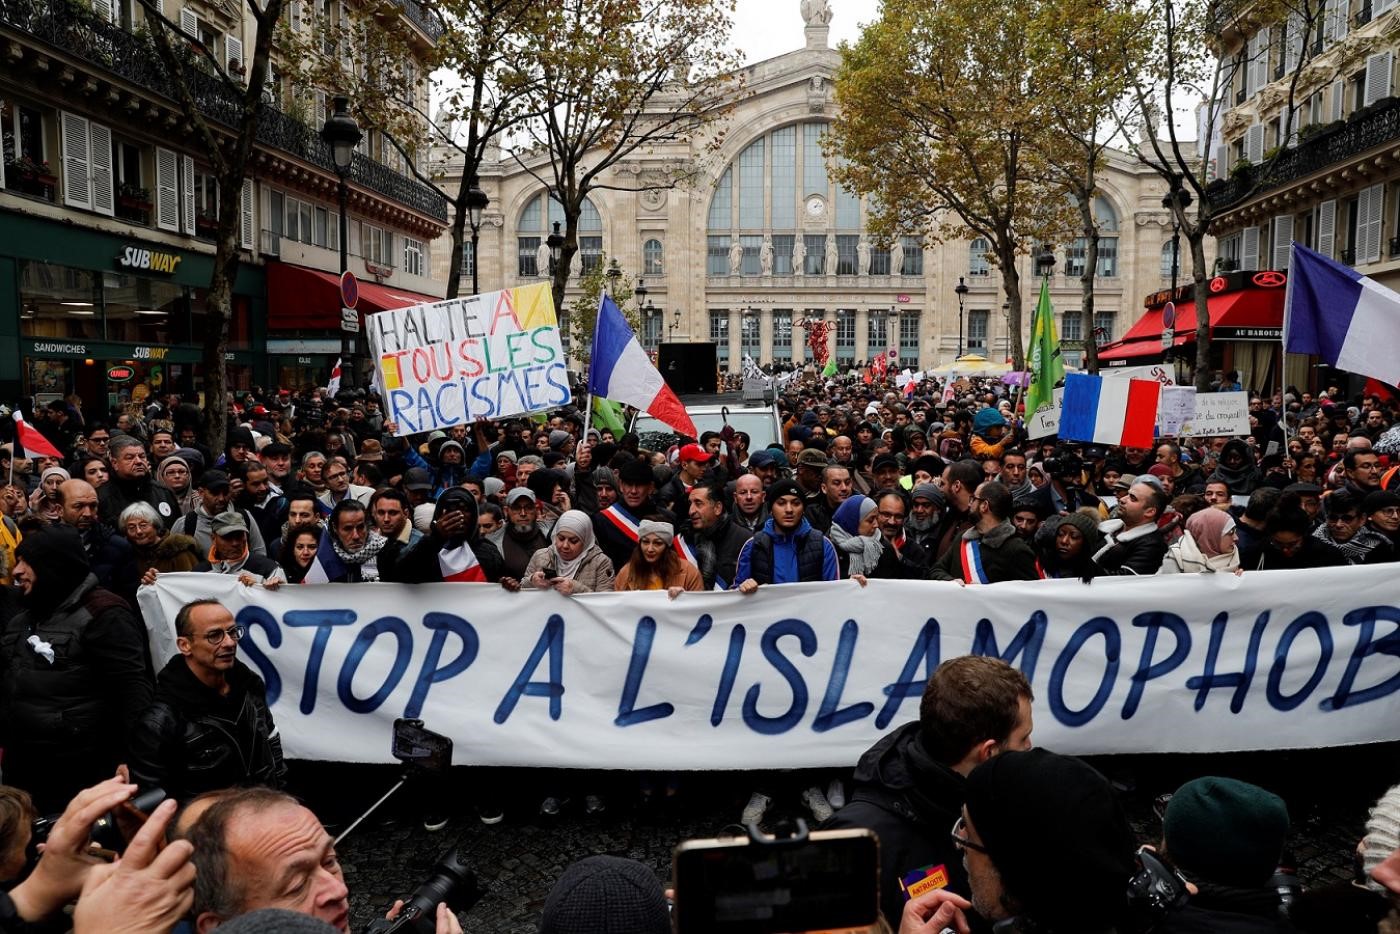 A demonstration against Islamophobia in Paris on 10 November, 2019 (AFP)